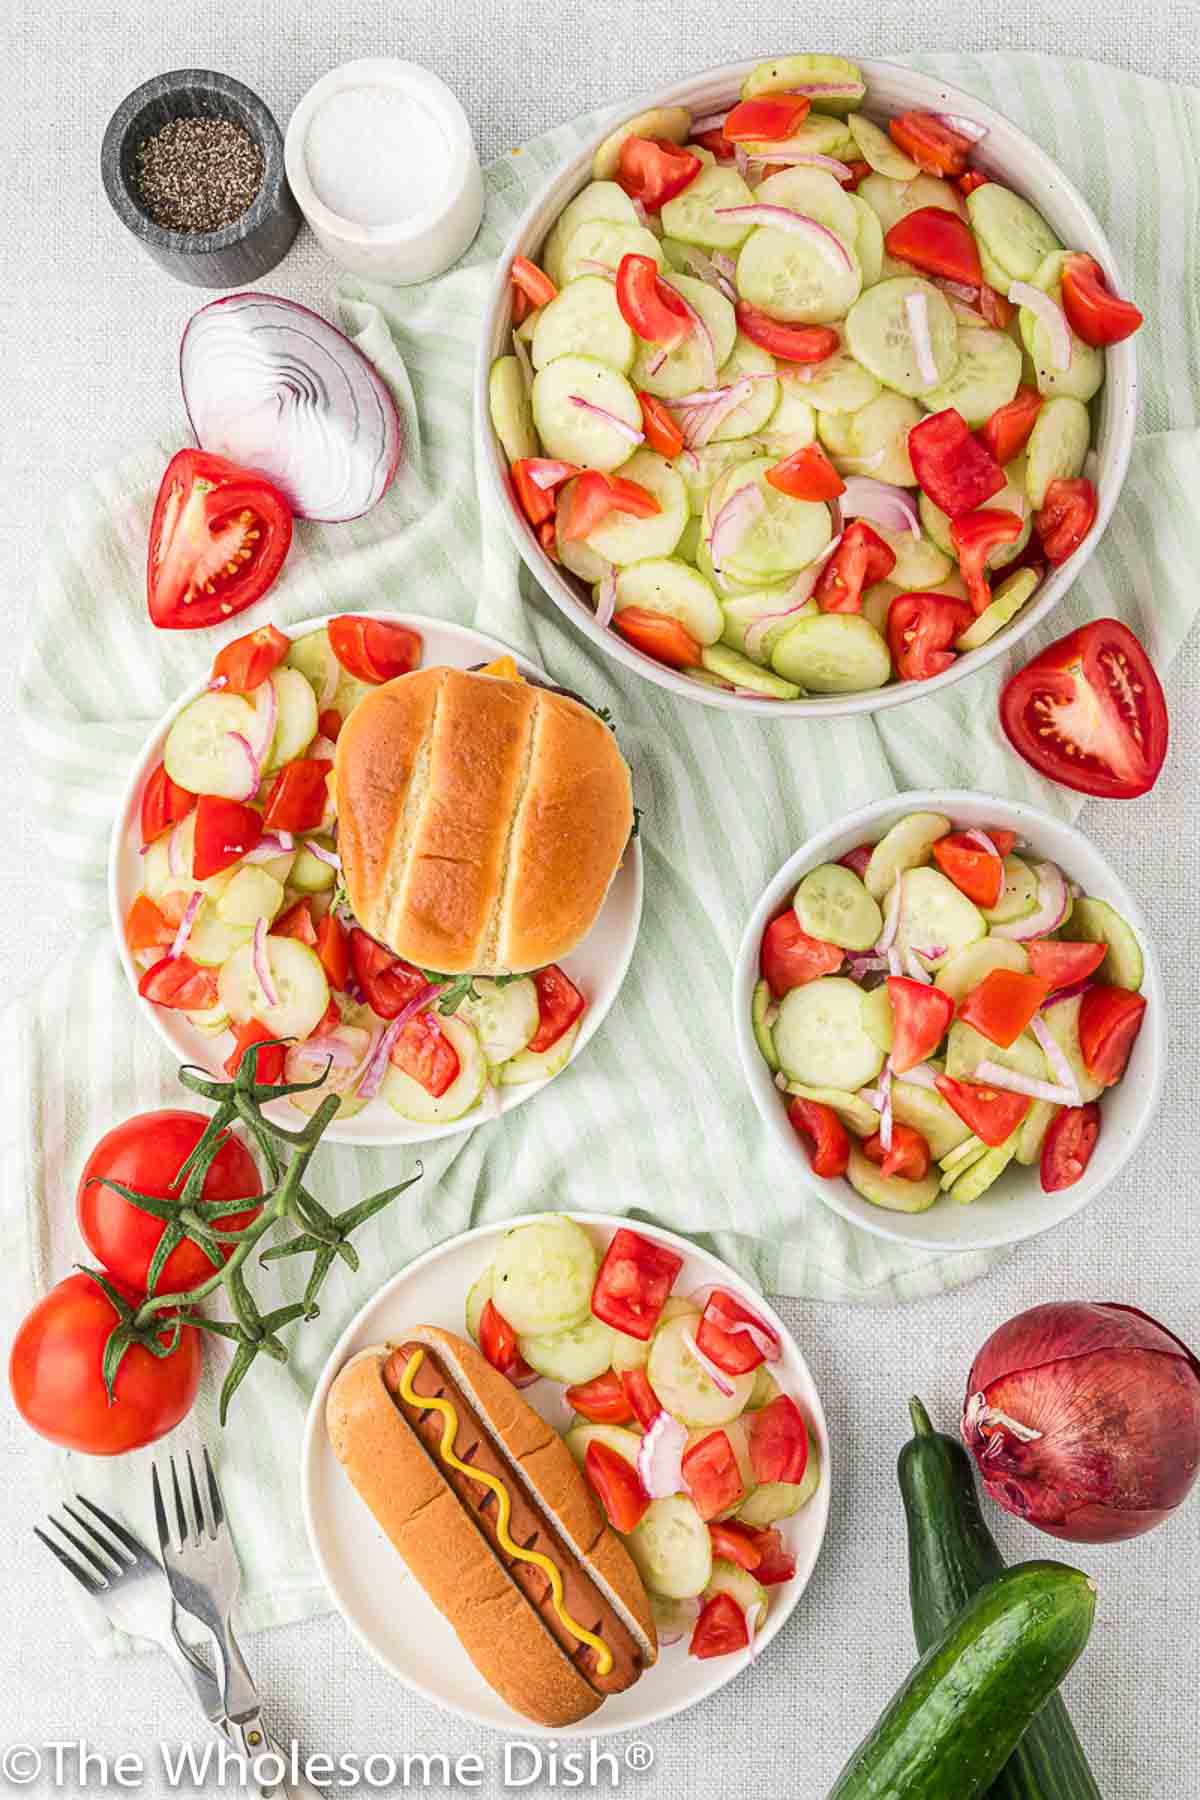 Cucumber salad being served as a side dish for burgers and hot dogs.